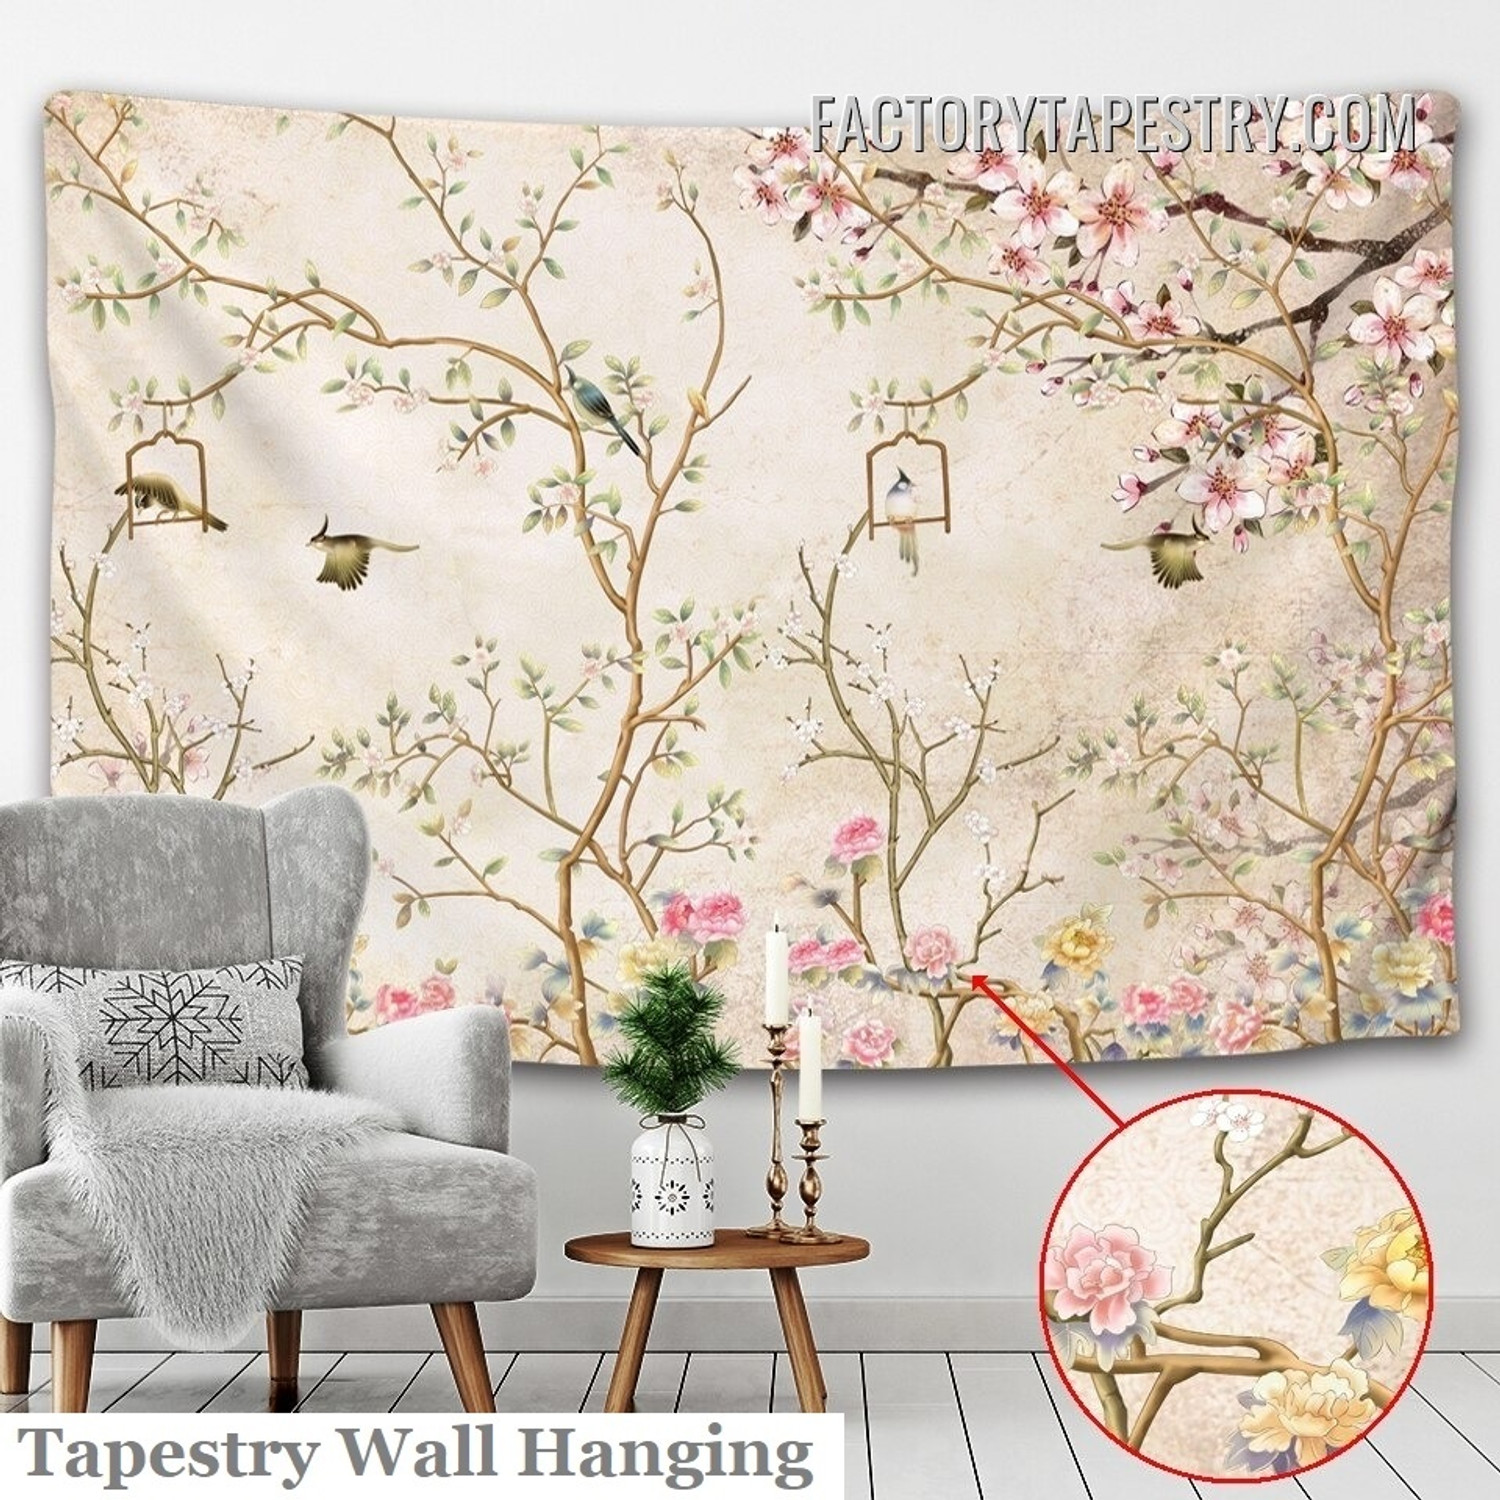 Birds and Flowers X Floral Retro Wall Hanging Tapestry